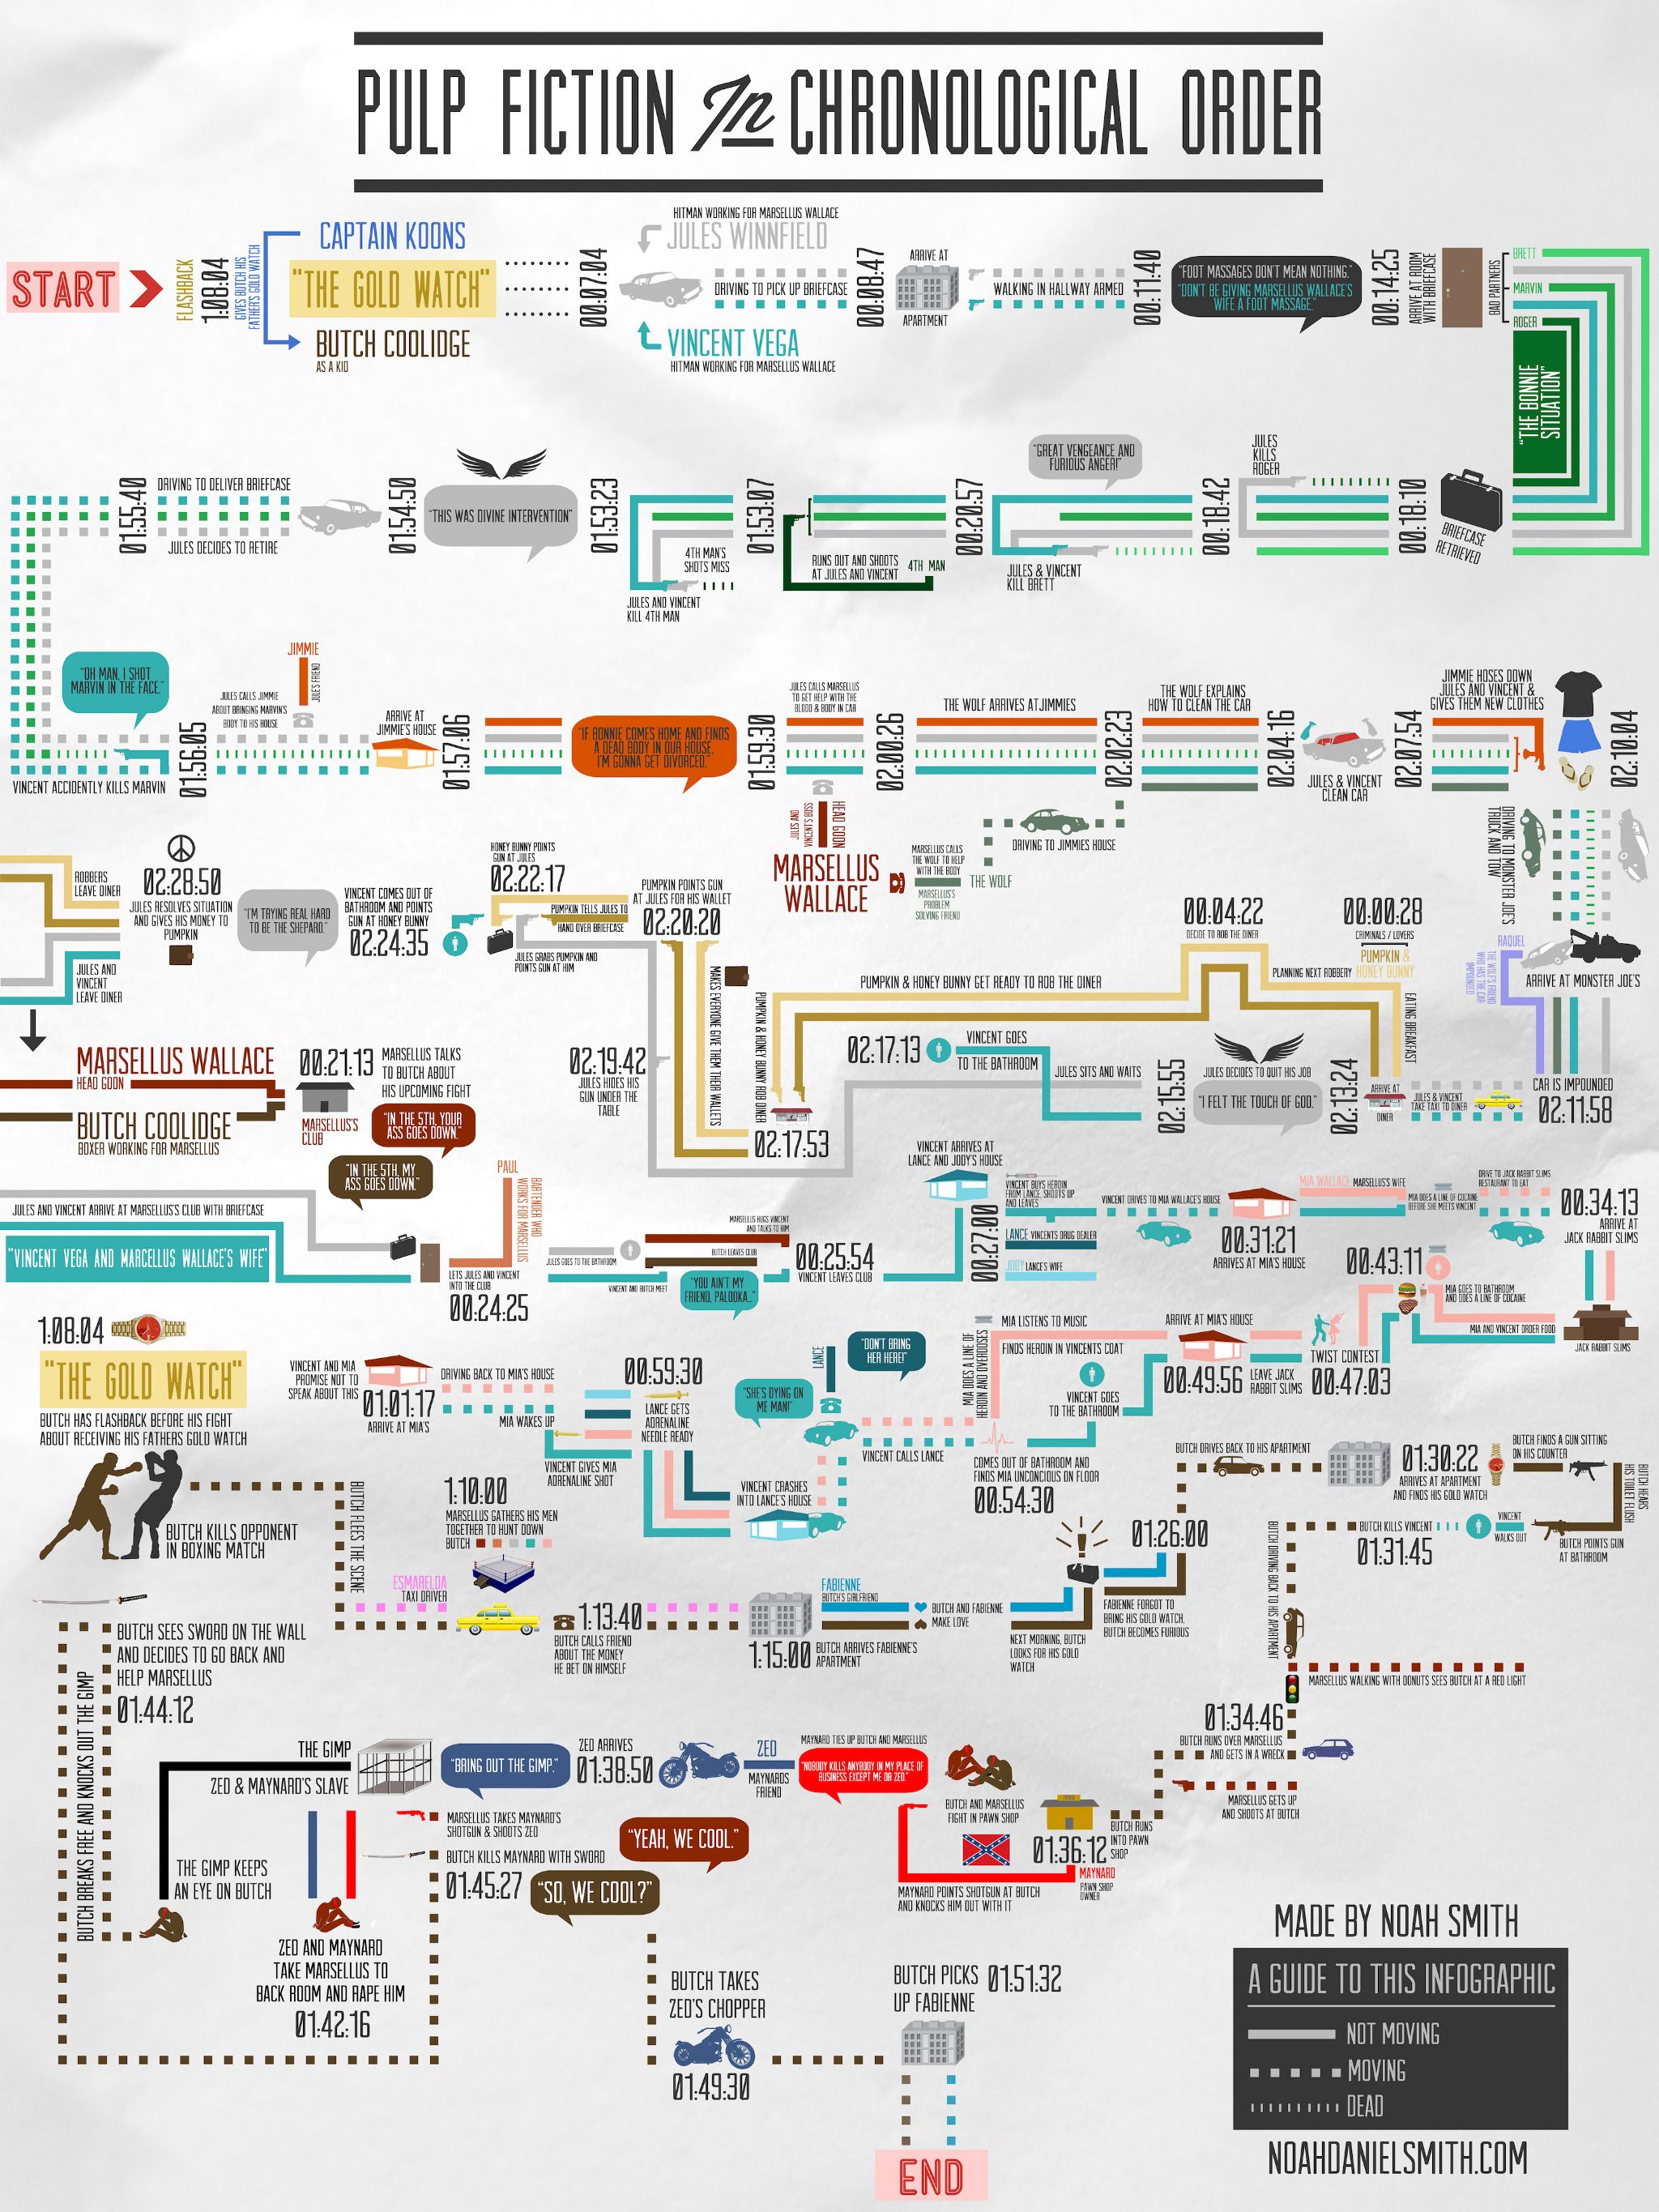 Pulp Fiction in chronological order by Noah Smith